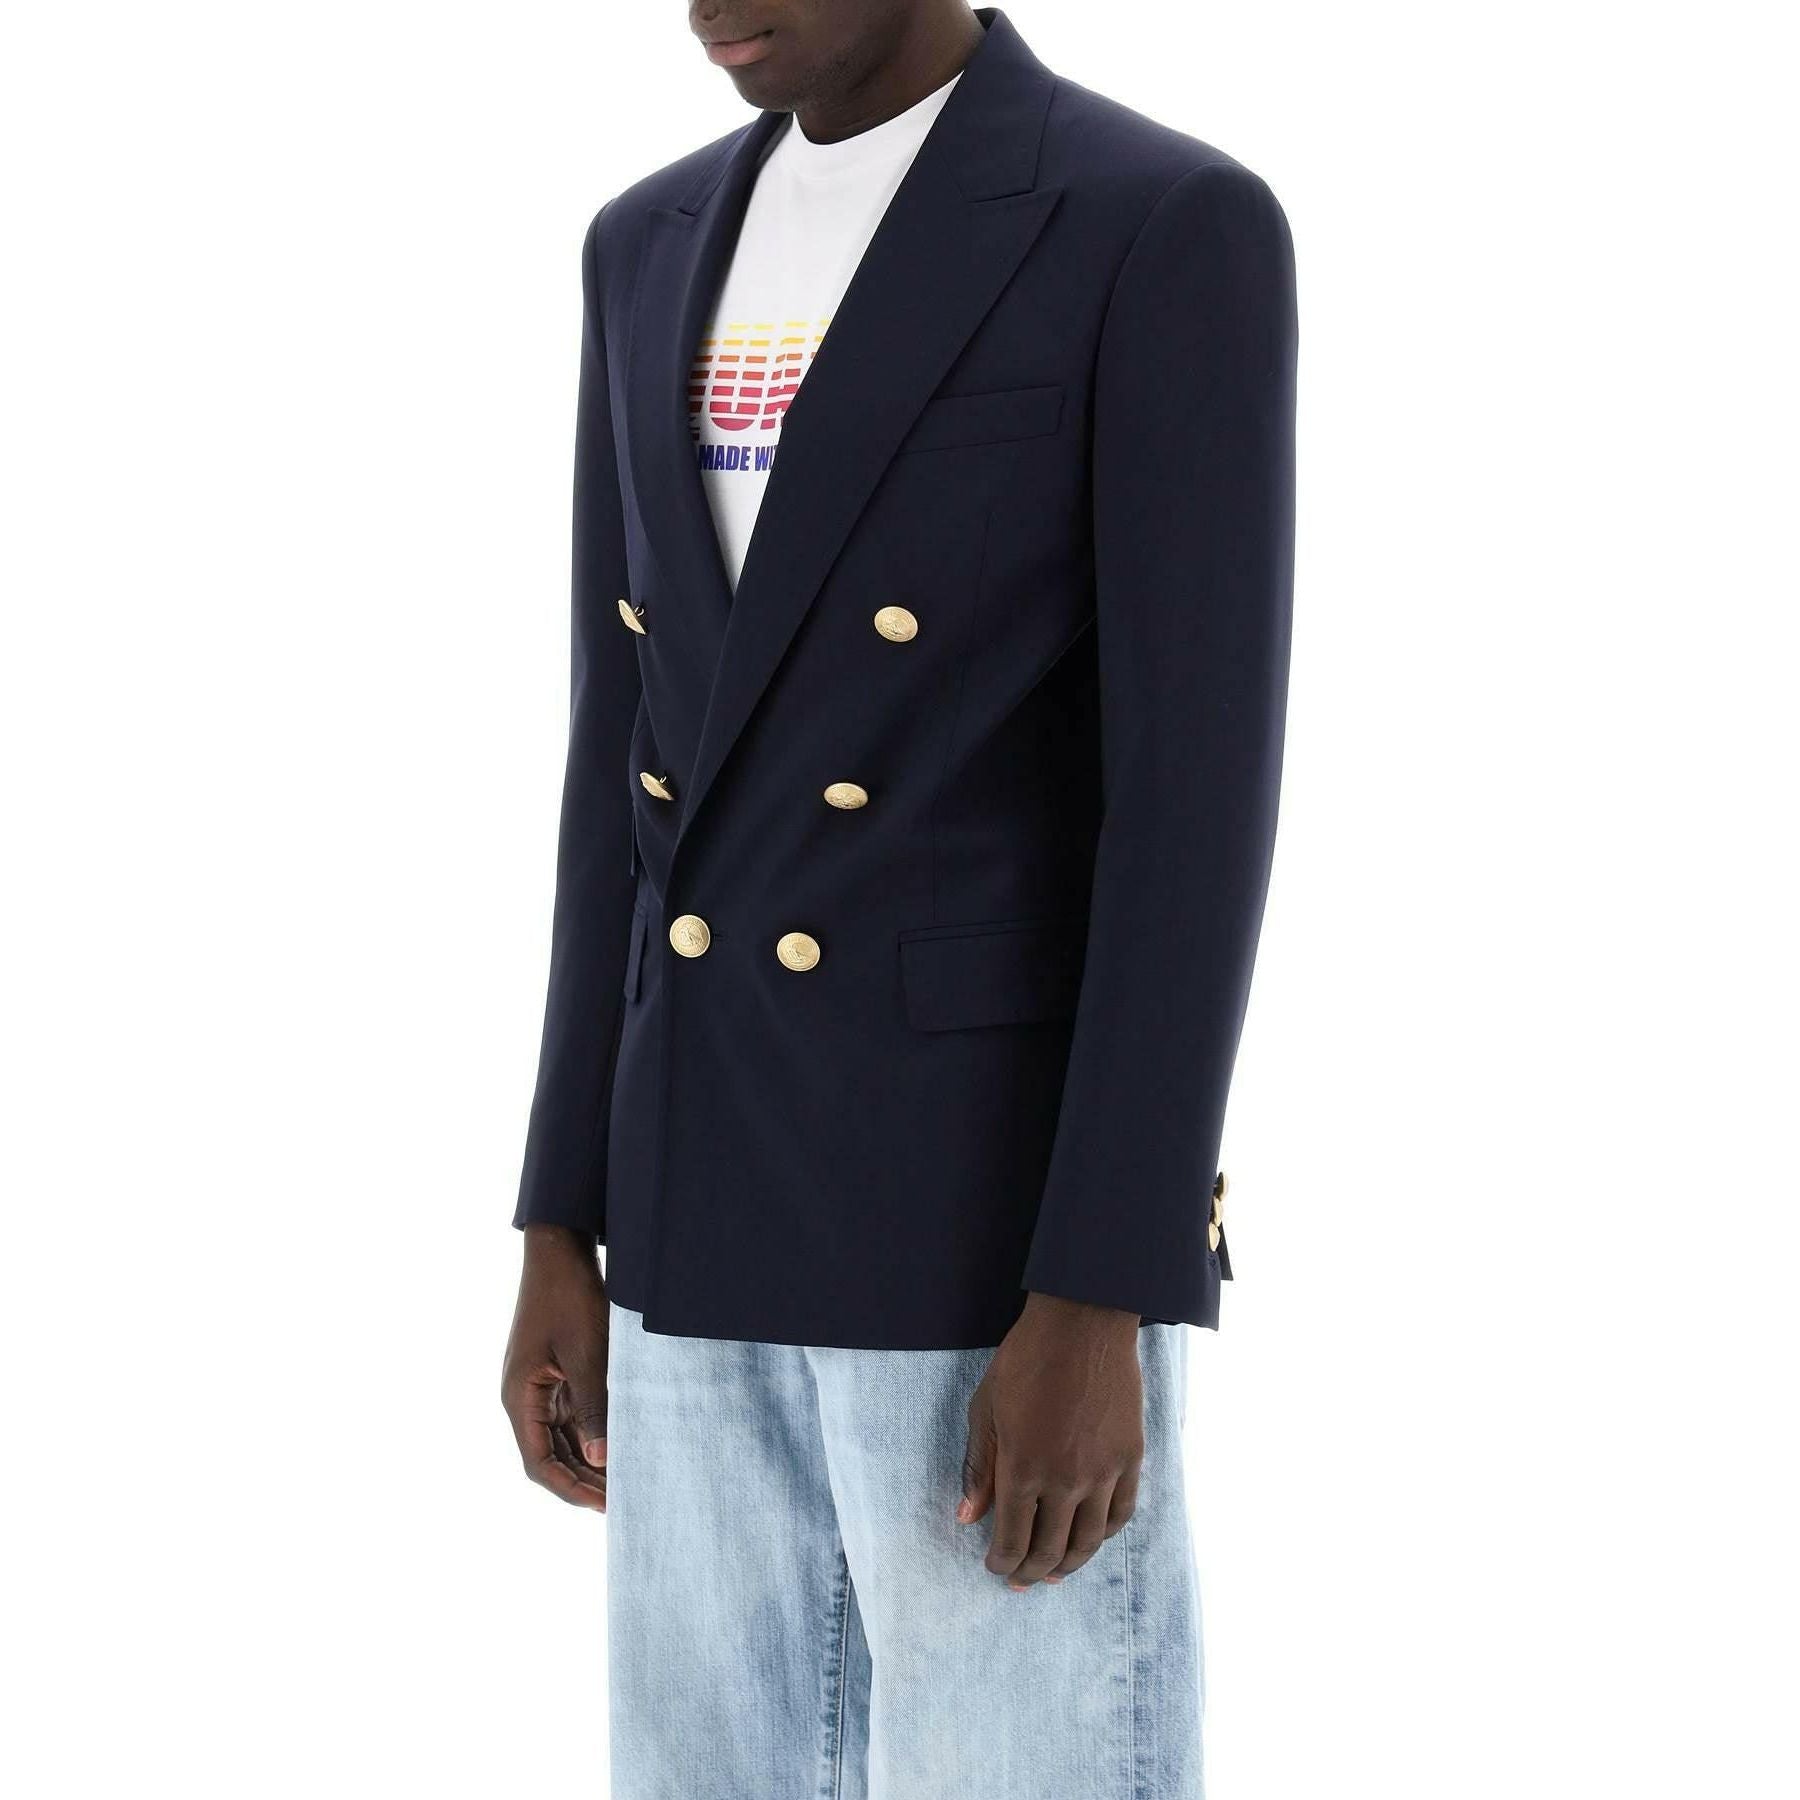 Navy Blue Wool Palm Beach Double-Breasted Jacket With Gold Buttons DSQUARED2 JOHN JULIA.